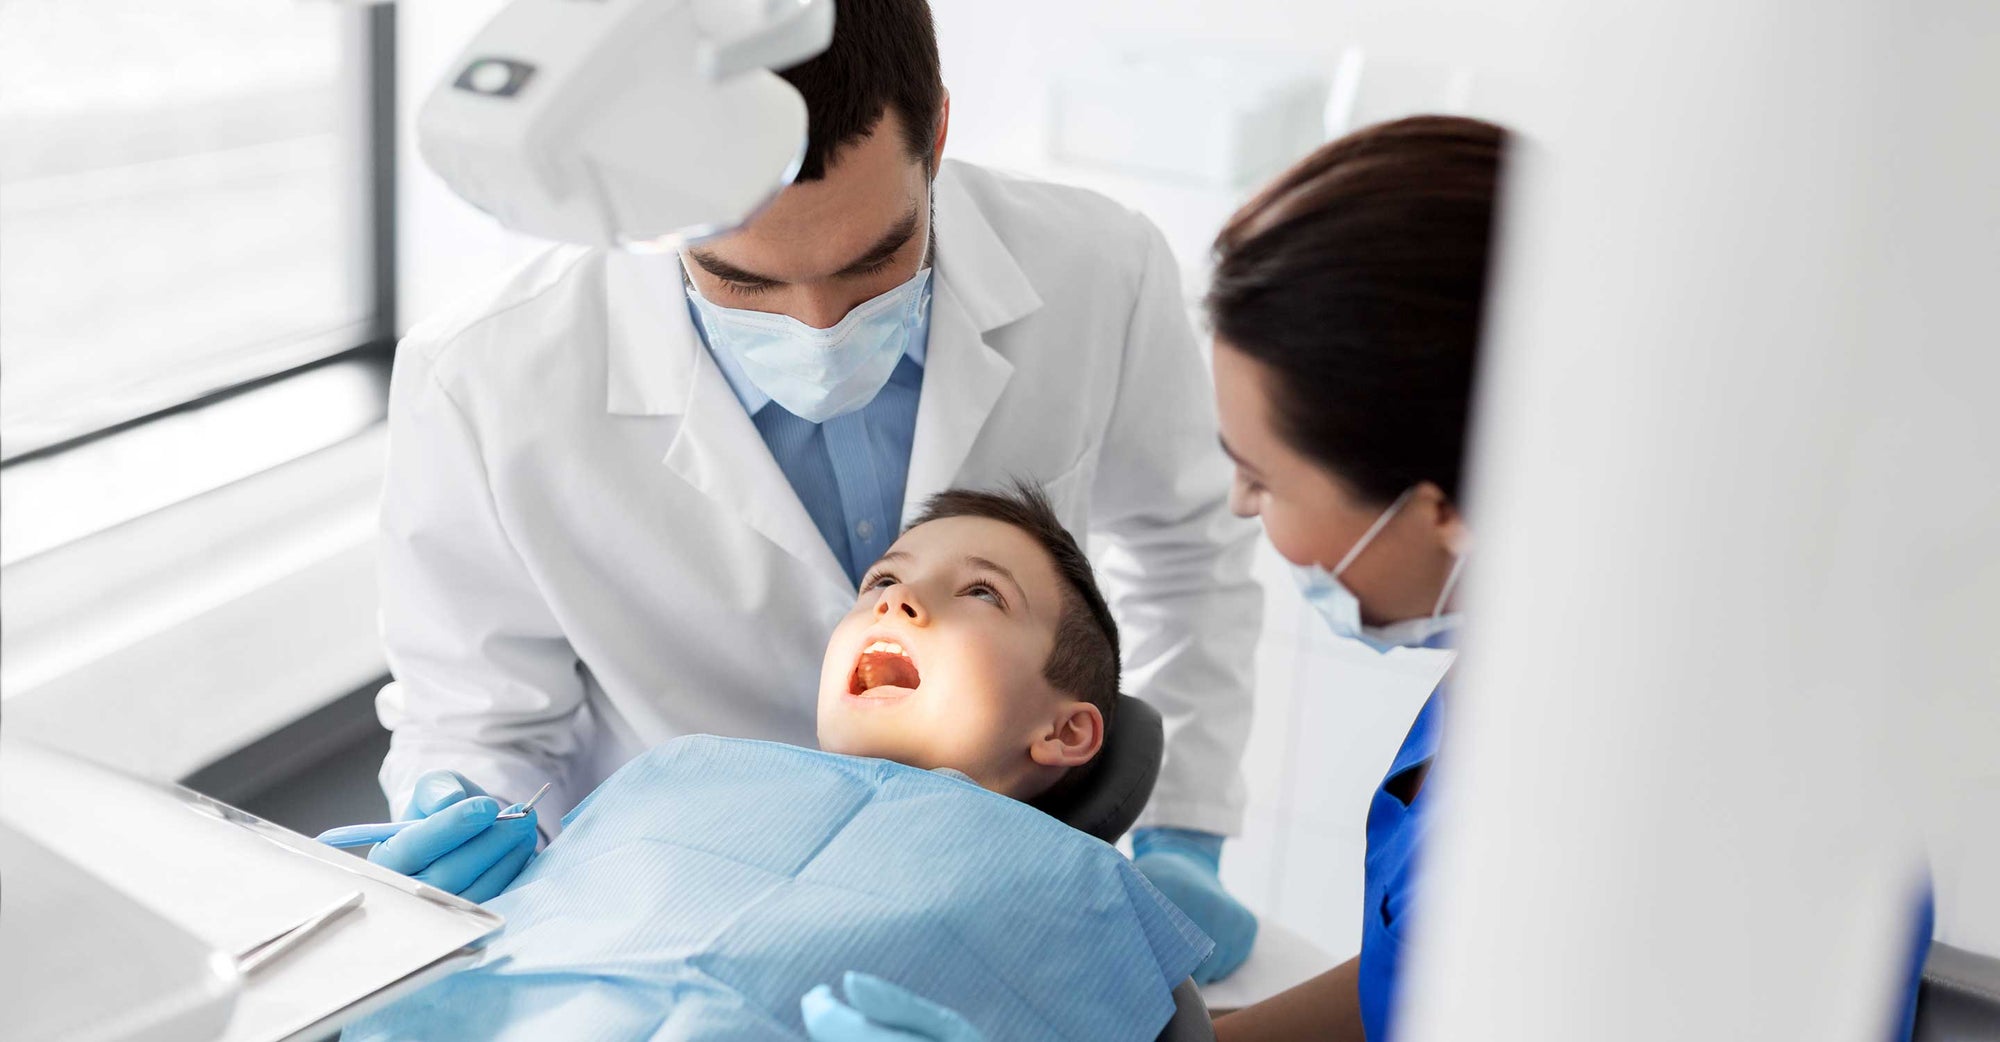 Air Quality In Dental Practices And Operatories